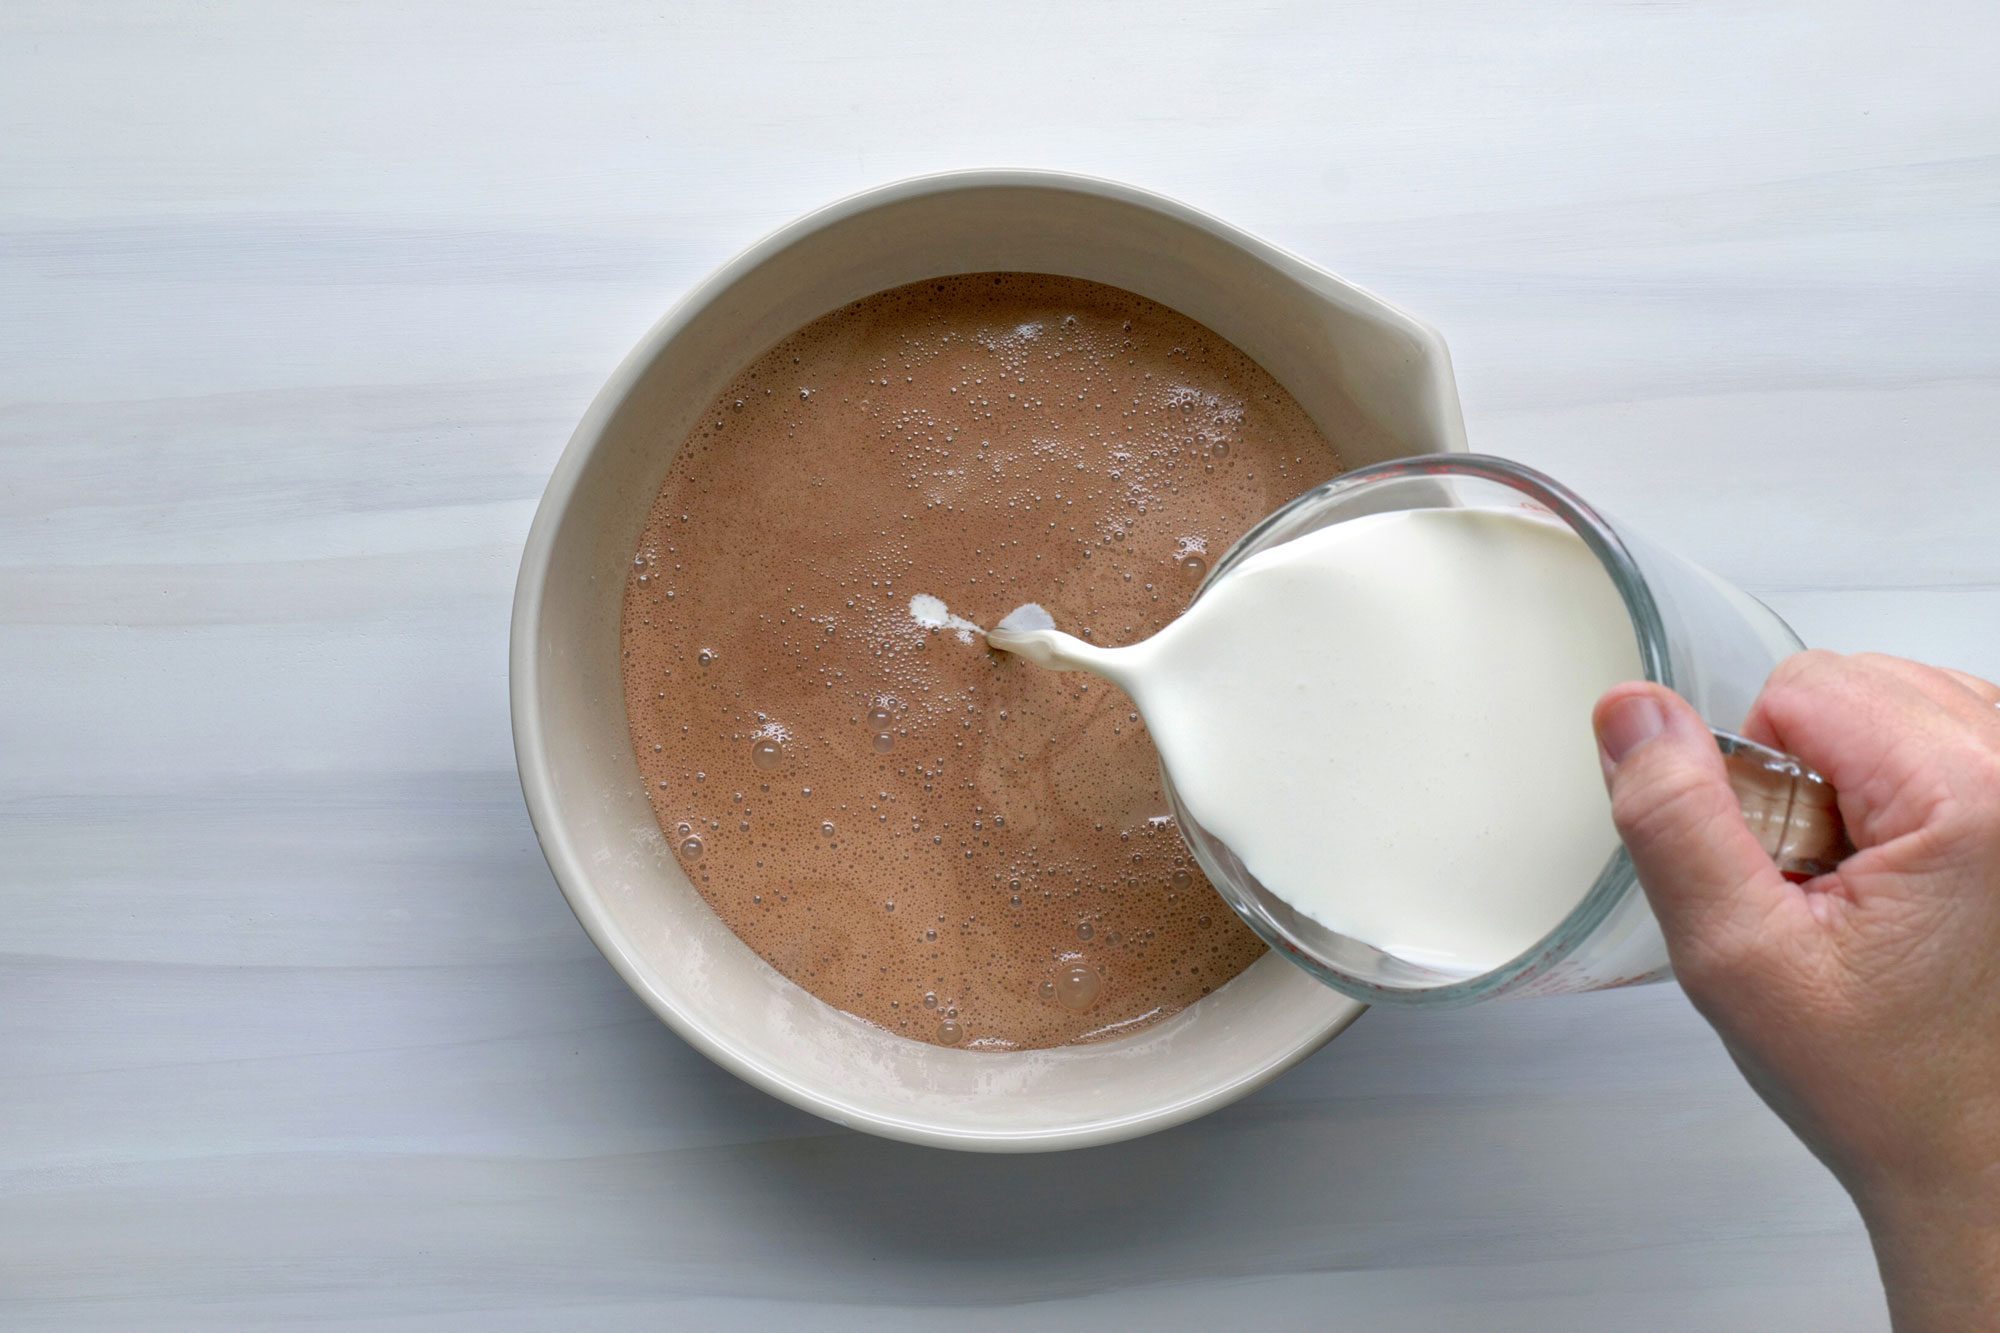 Transfer smooth mixture into a large bowl and stir in with heavy cream